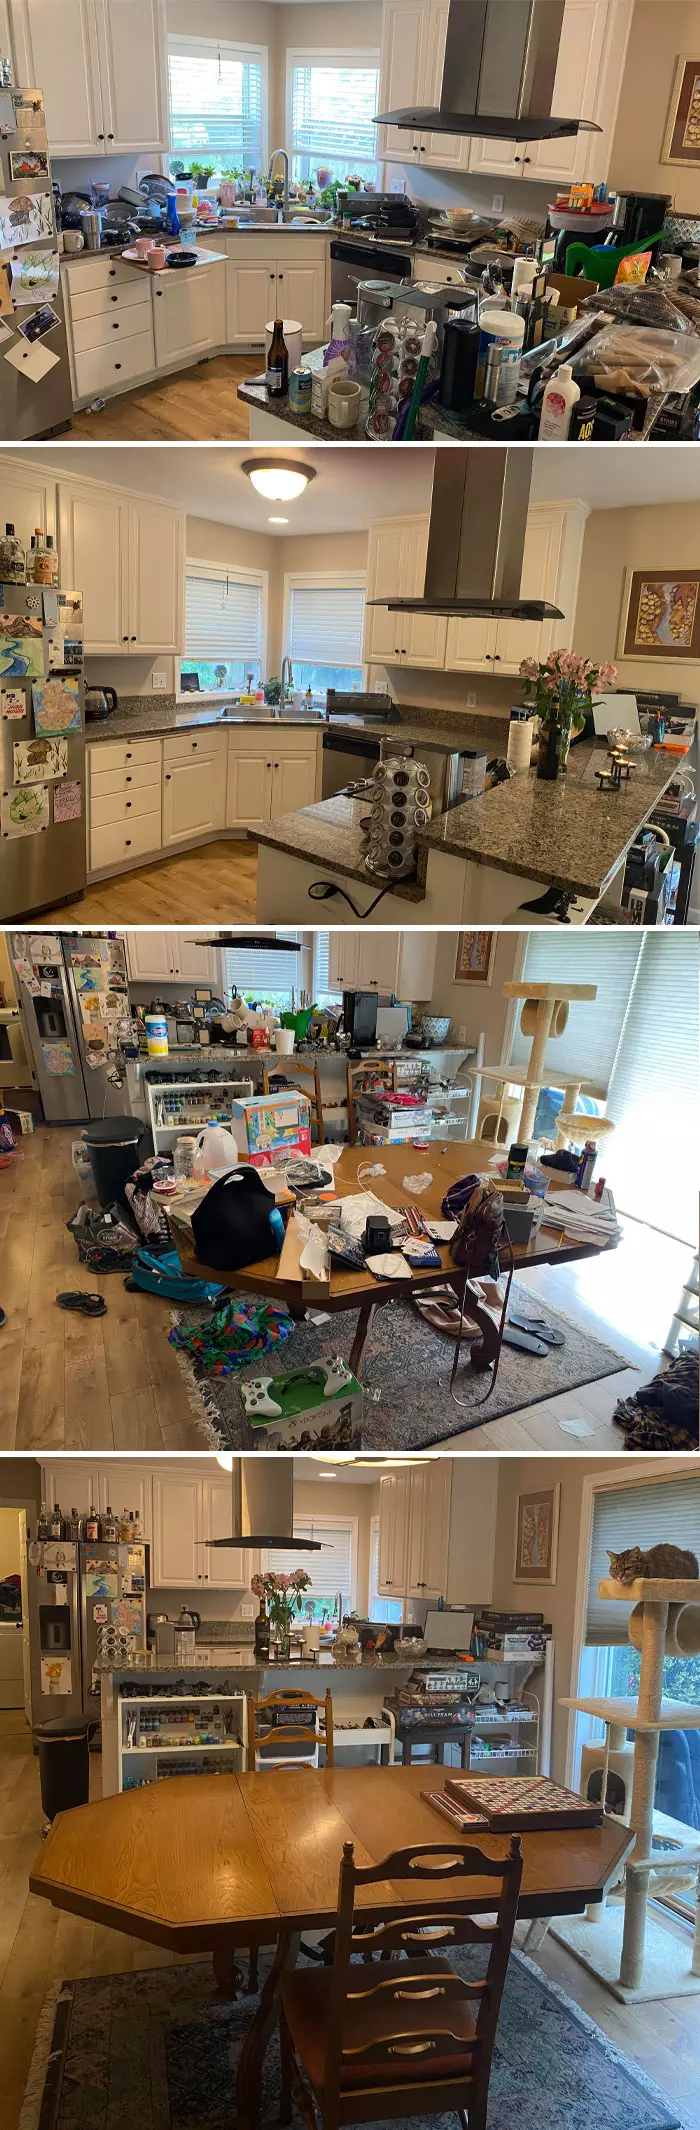 30 Oddly Satisfying Pics Of Spaces Before And After Being Cleaned